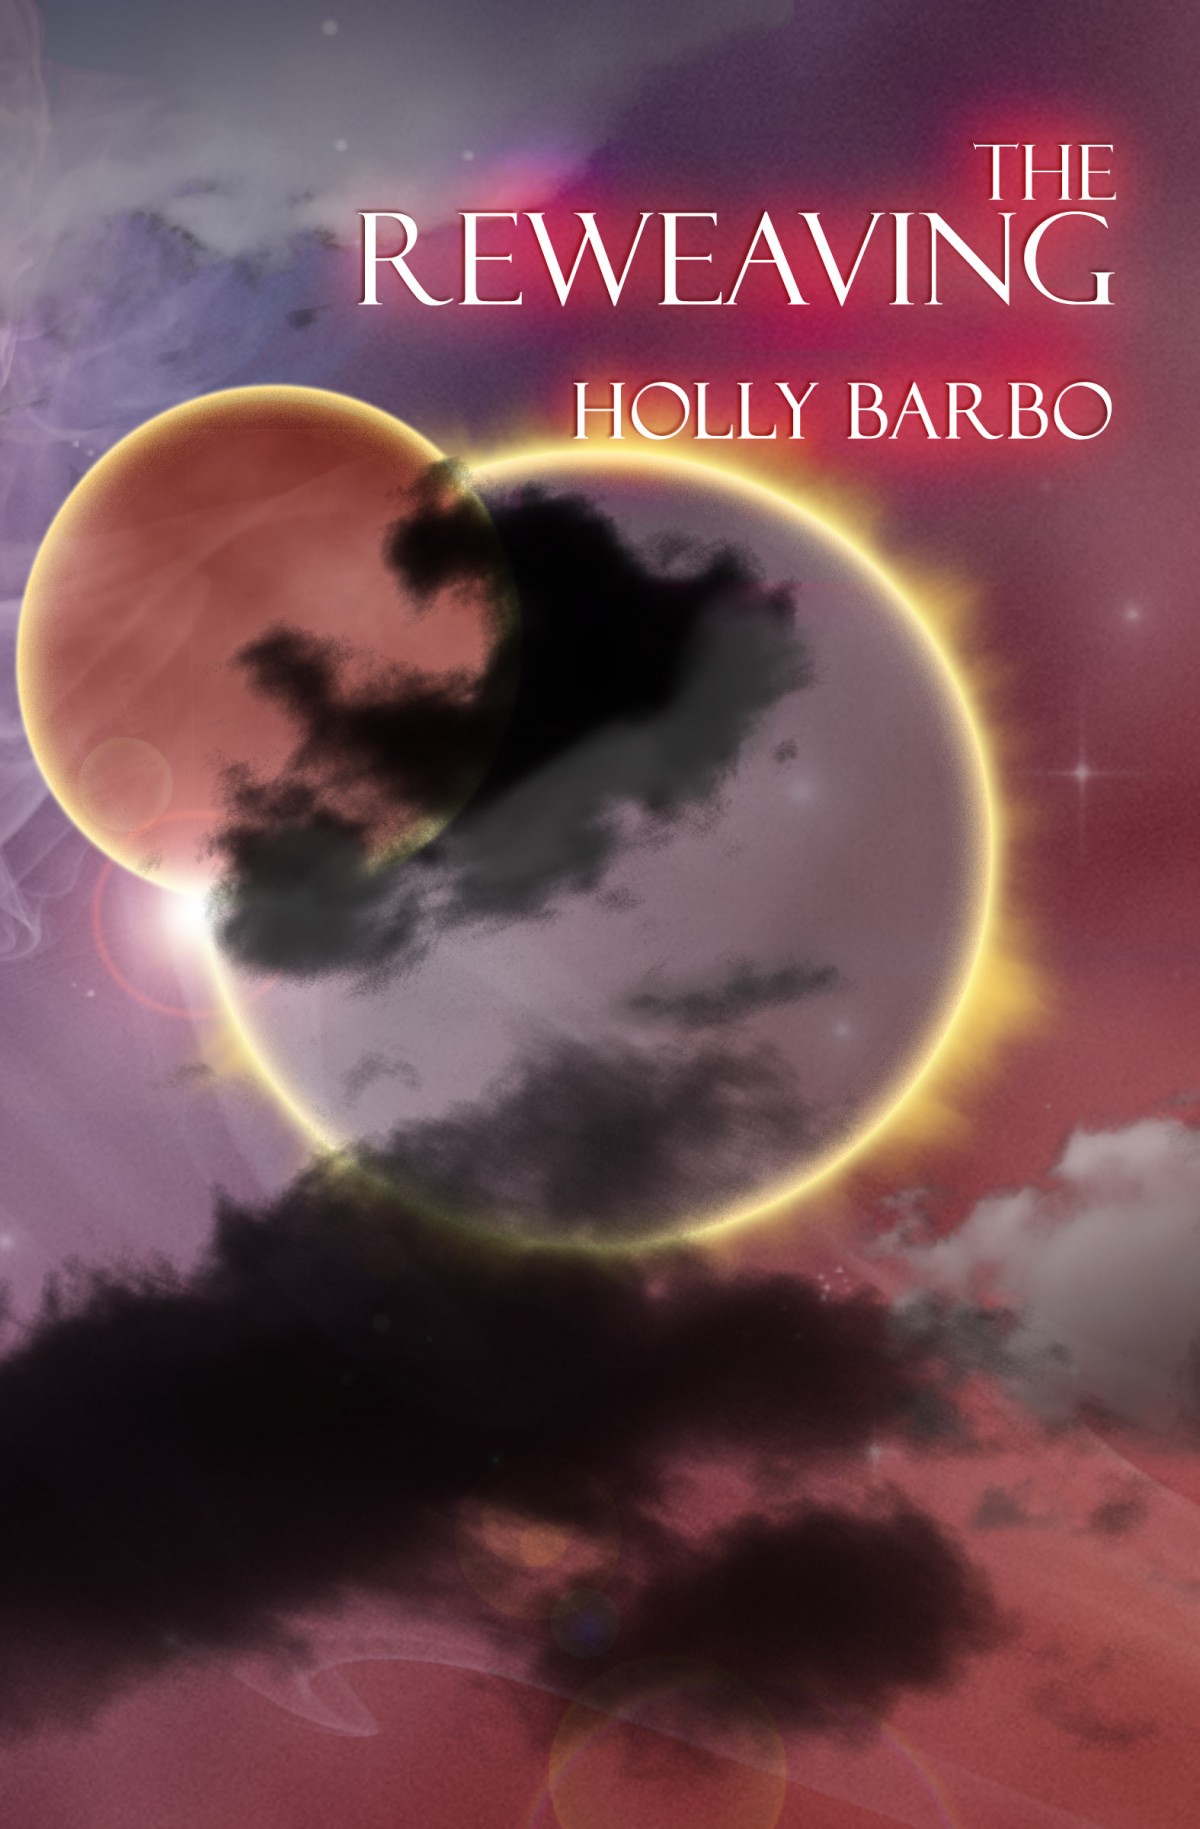 The Reweaving by Holly Barbo